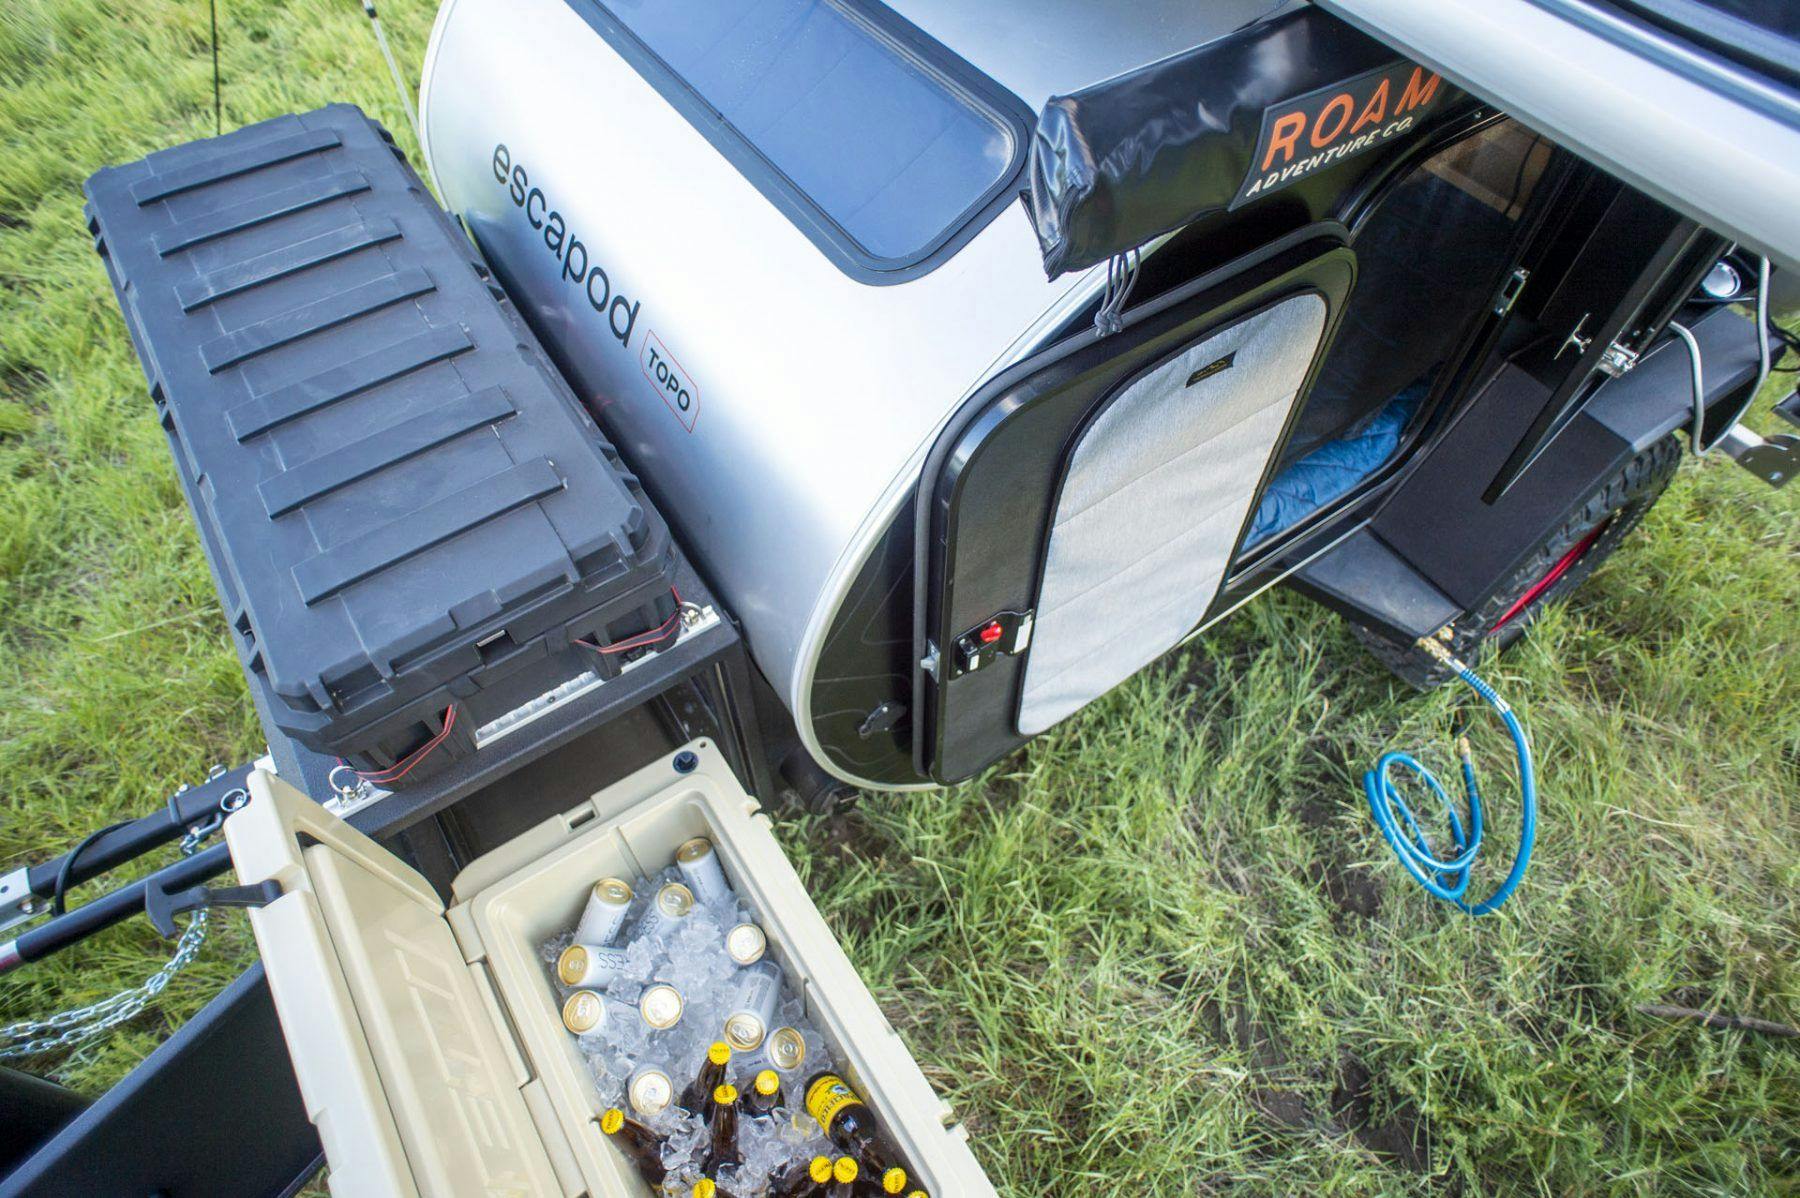 A teardrop trailer fully stocked with a cooler full of drinks for a weeknd of camping fun.